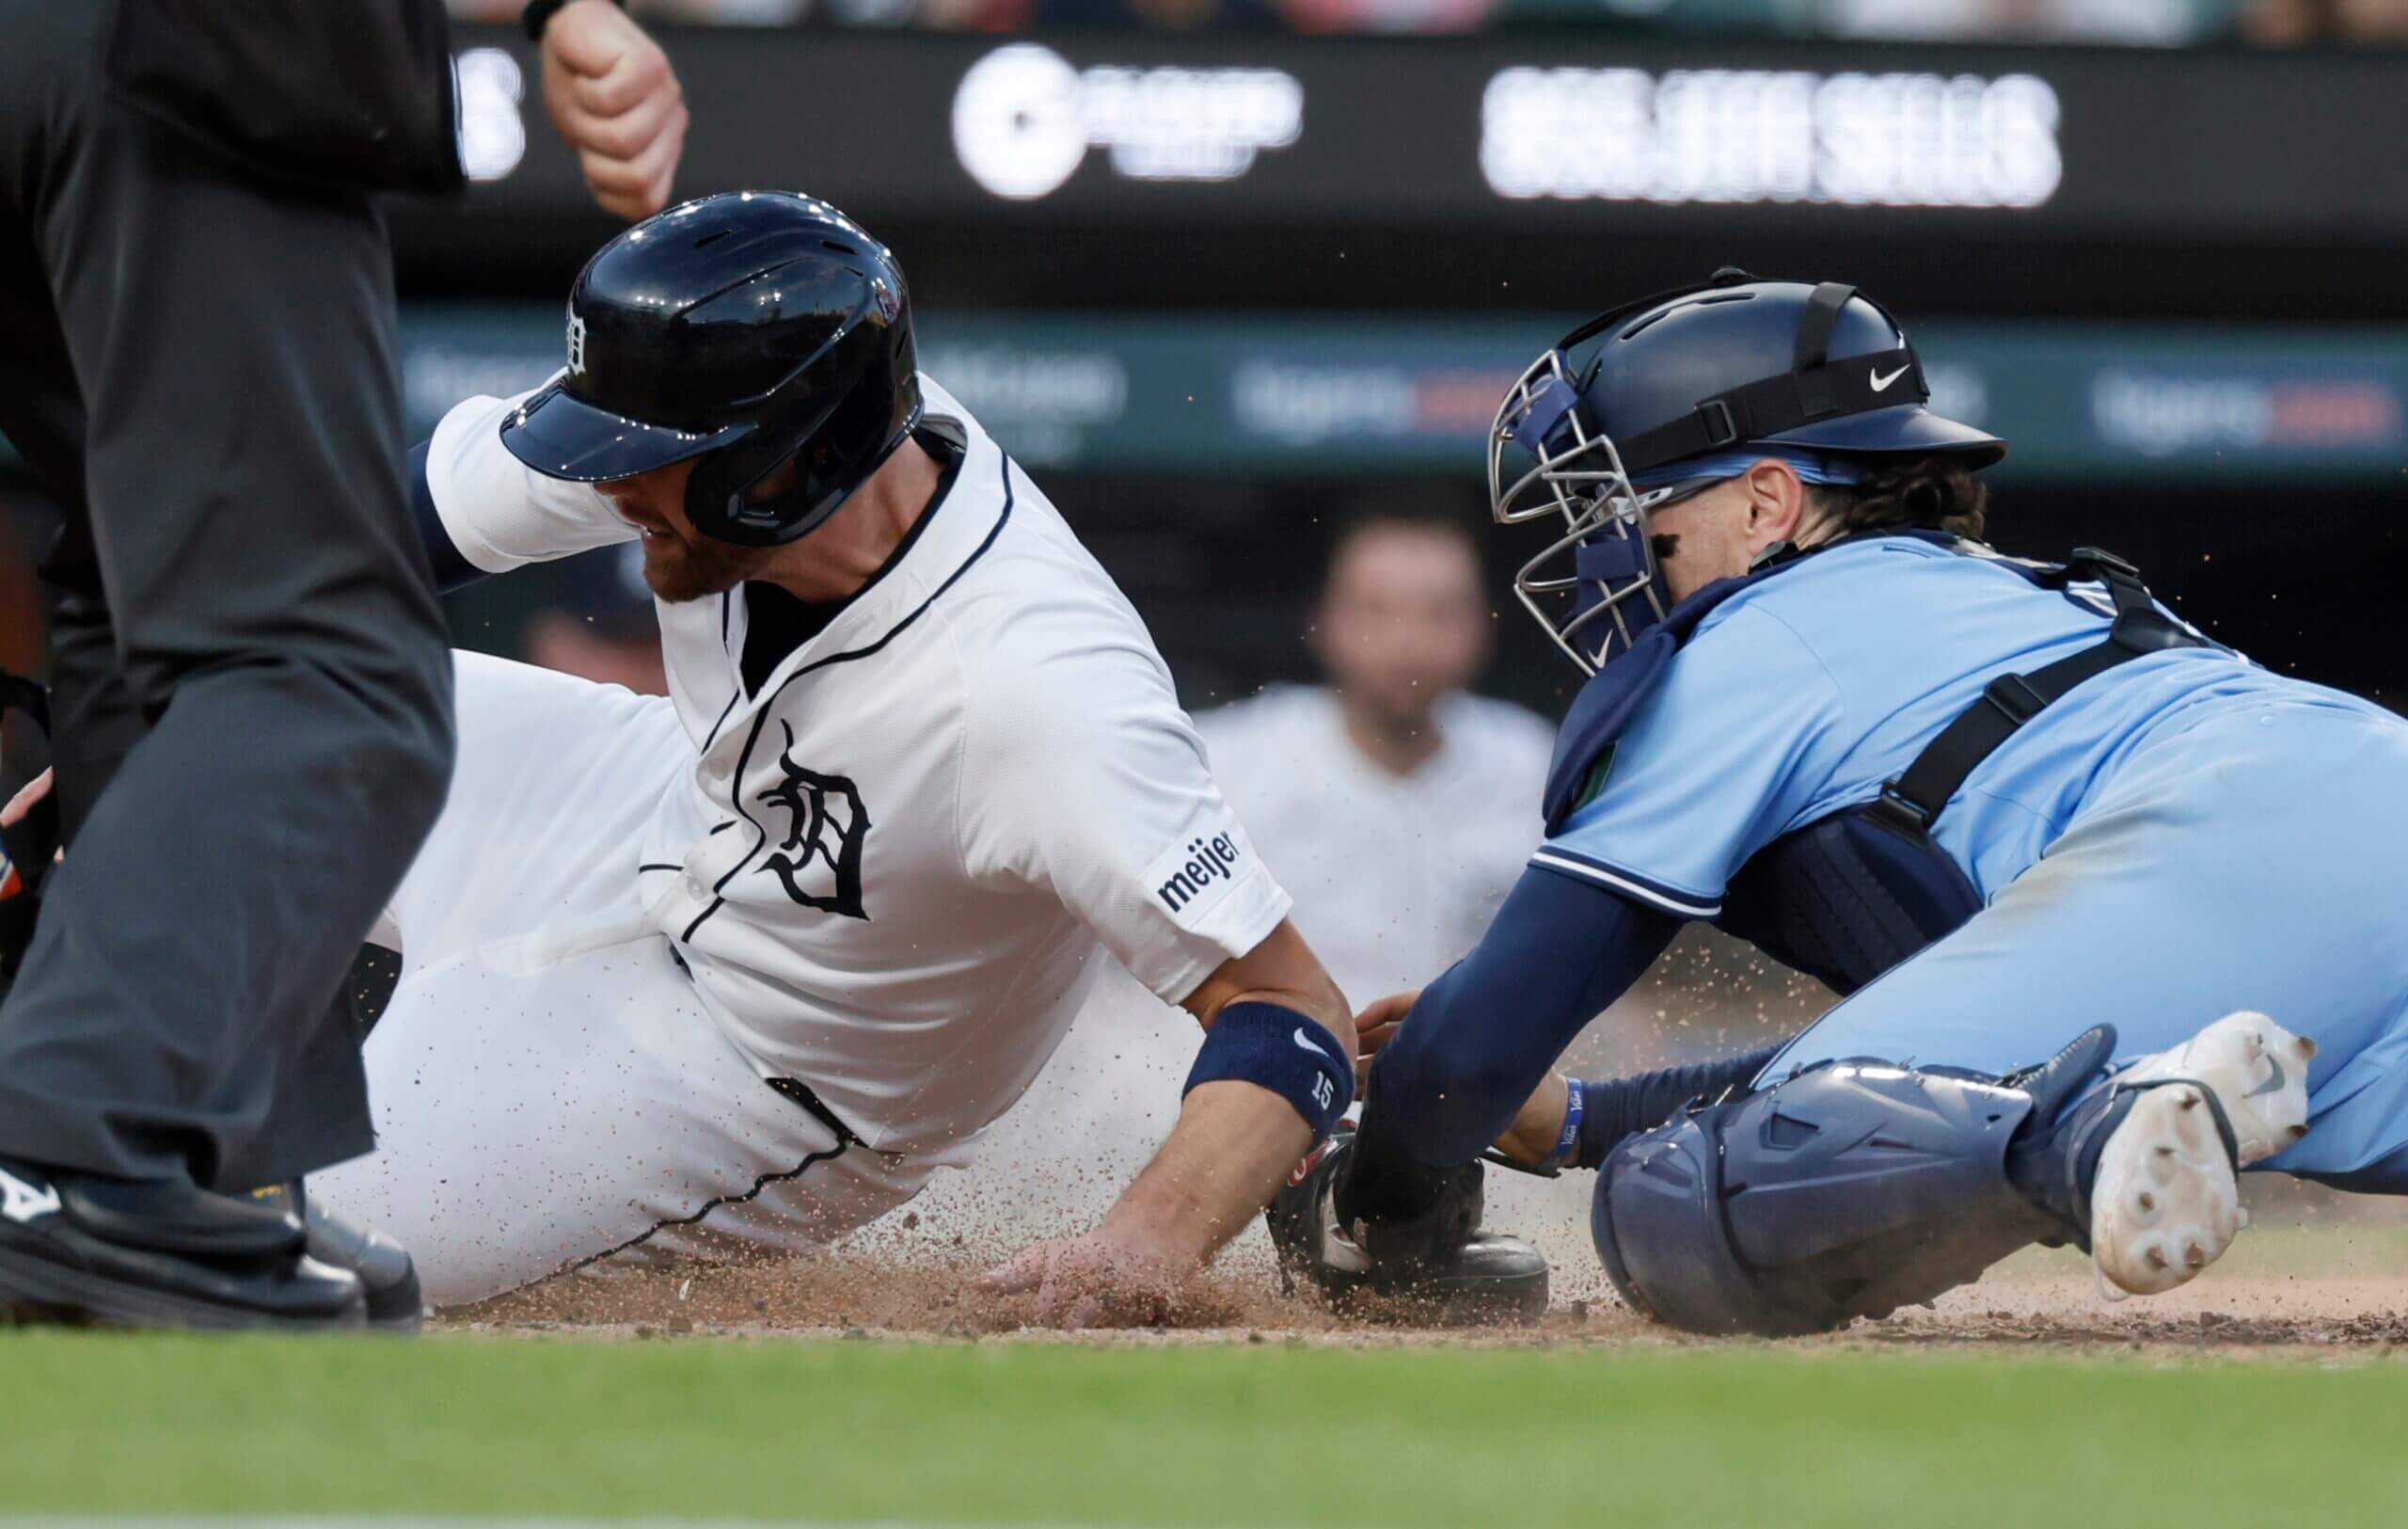 Despite poor optics, stats show the Tigers' aggressive base running is paying off